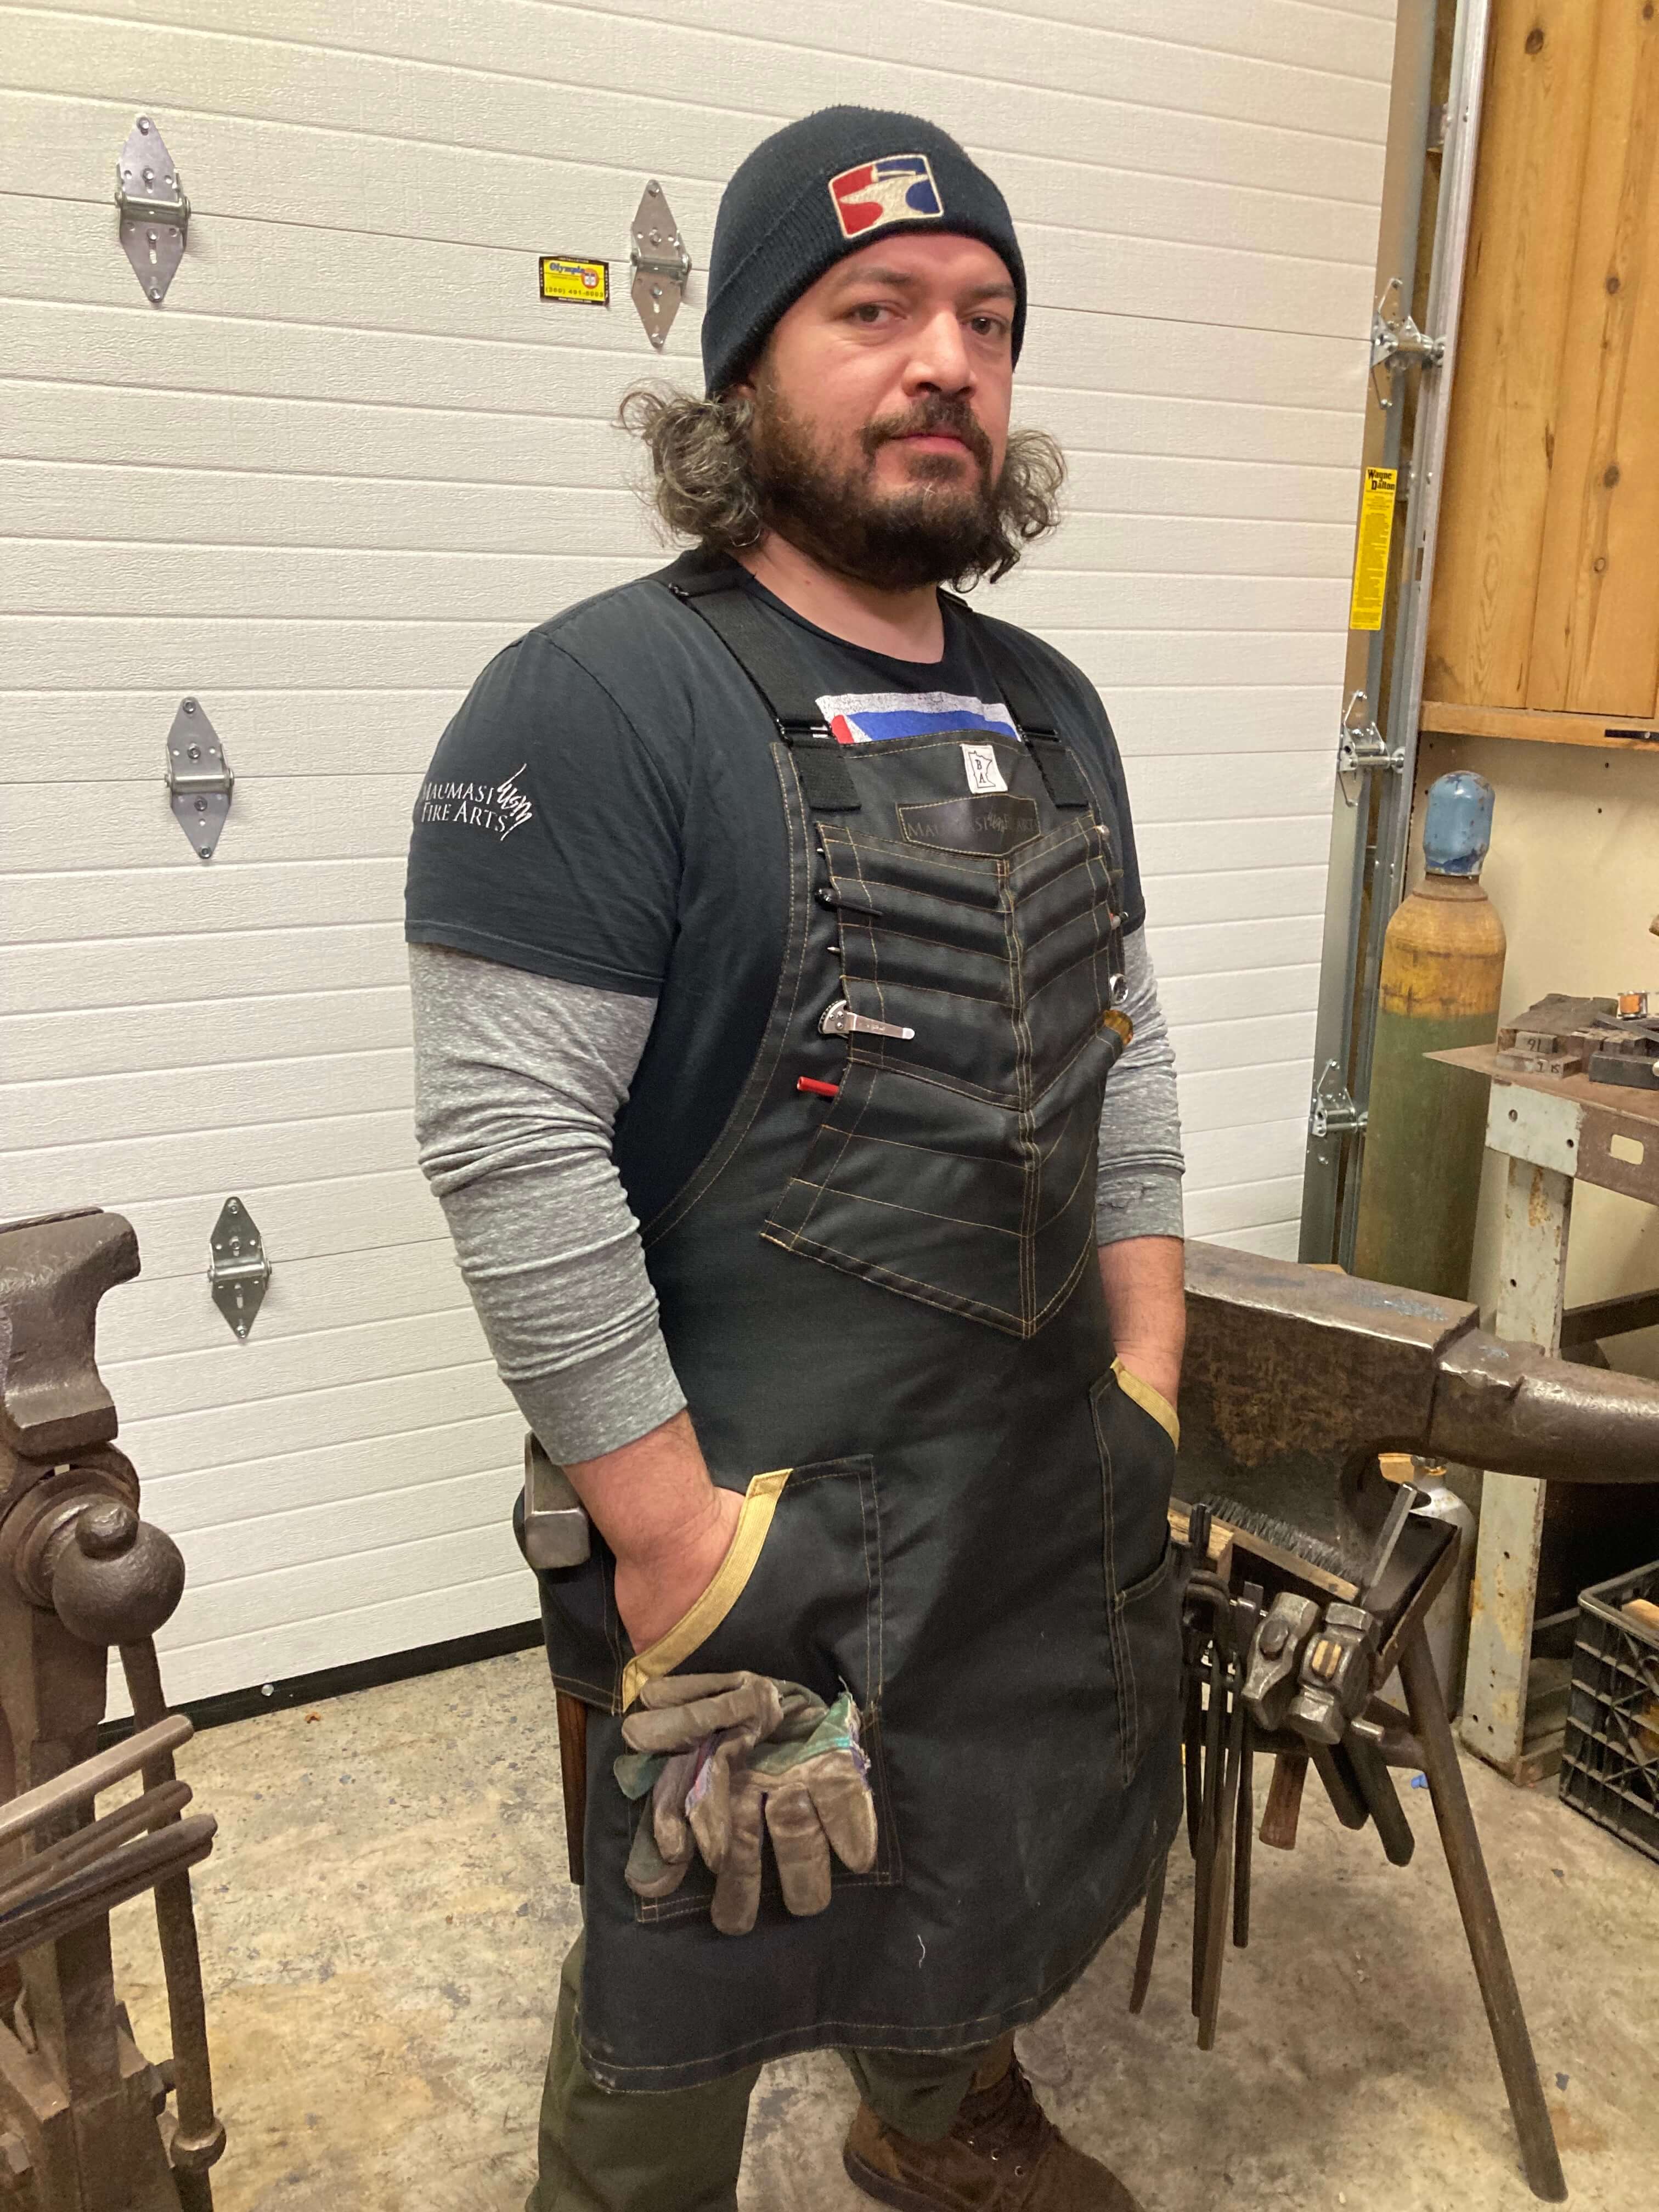 Image of Mareko Maumasi wearing the BAMF apron. The BAMF is a heavy-duty, protective Kevlar apron in black with yellow threading, and the perfect protective apron for knife makers. 